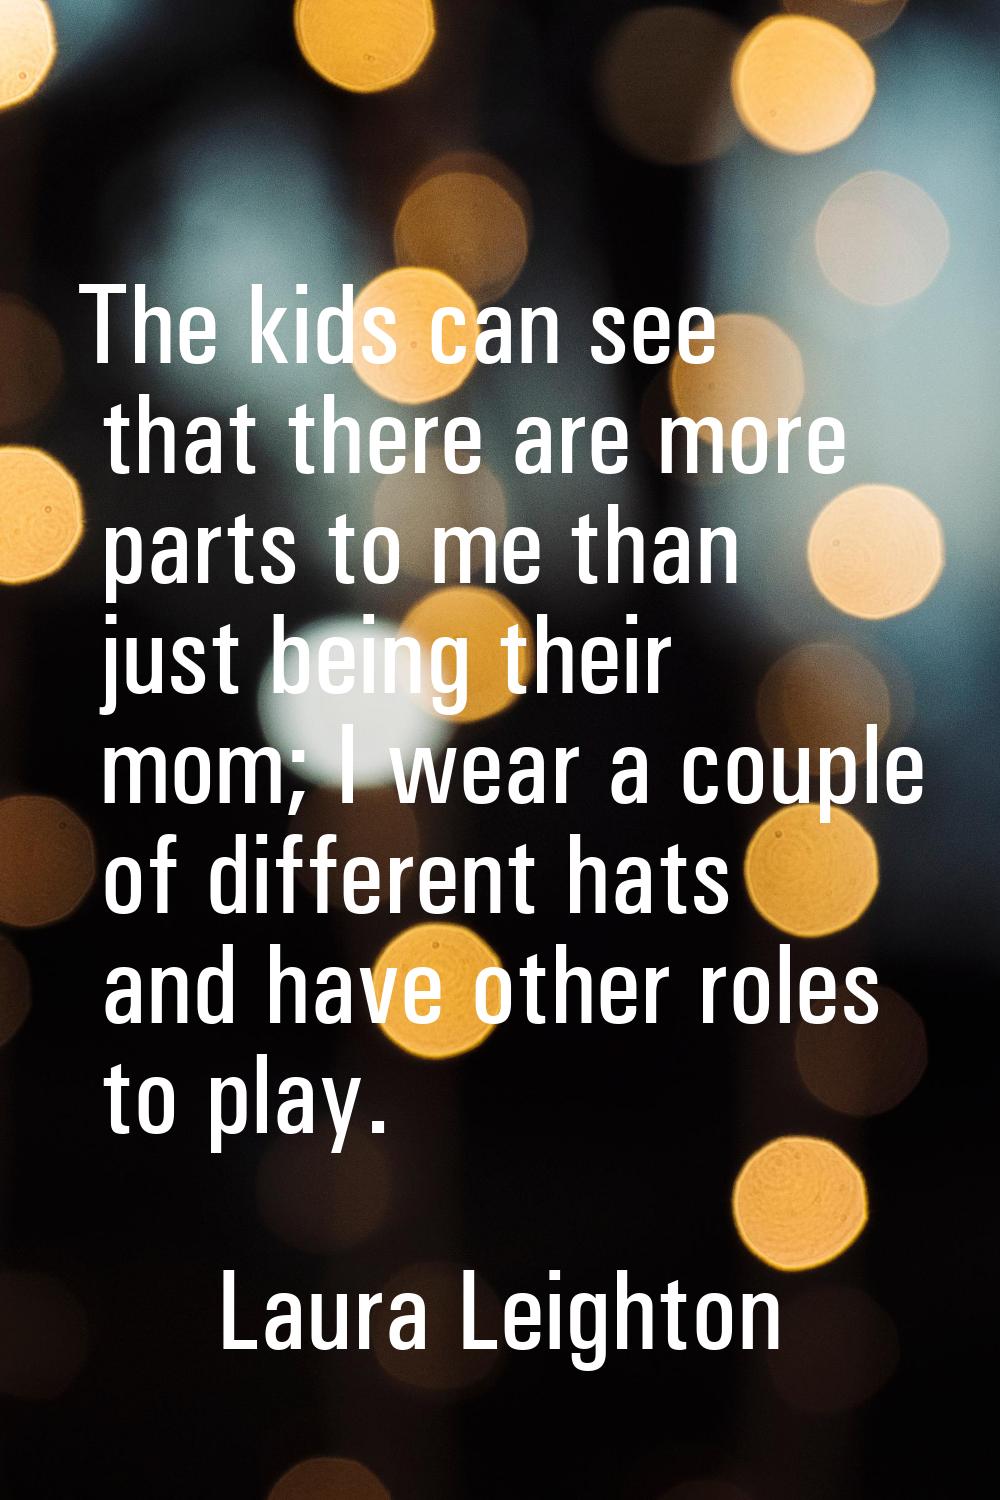 The kids can see that there are more parts to me than just being their mom; I wear a couple of diff